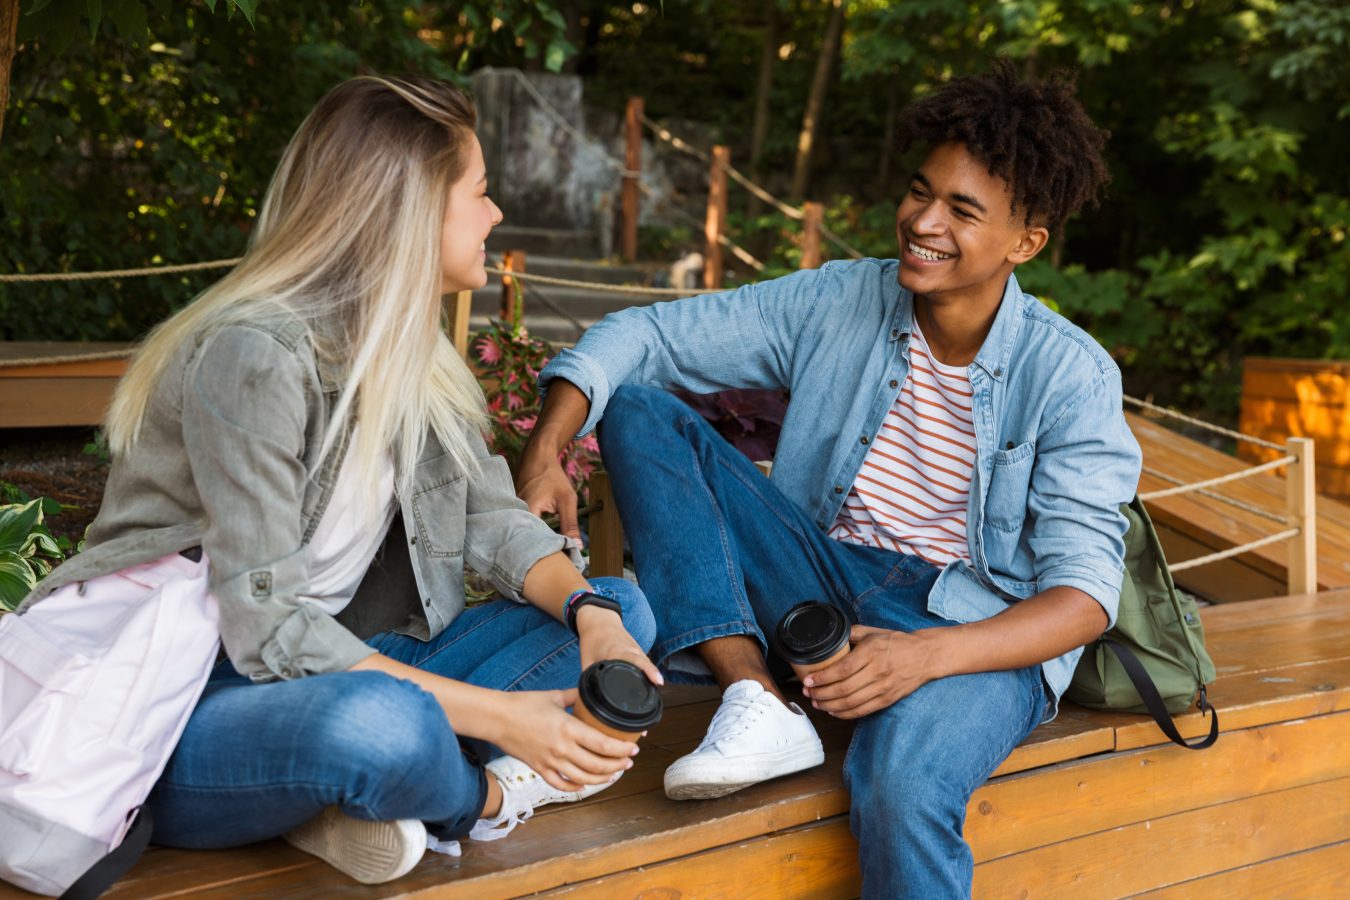 Two young adults sit and chat while participating in a exchange program abroad.